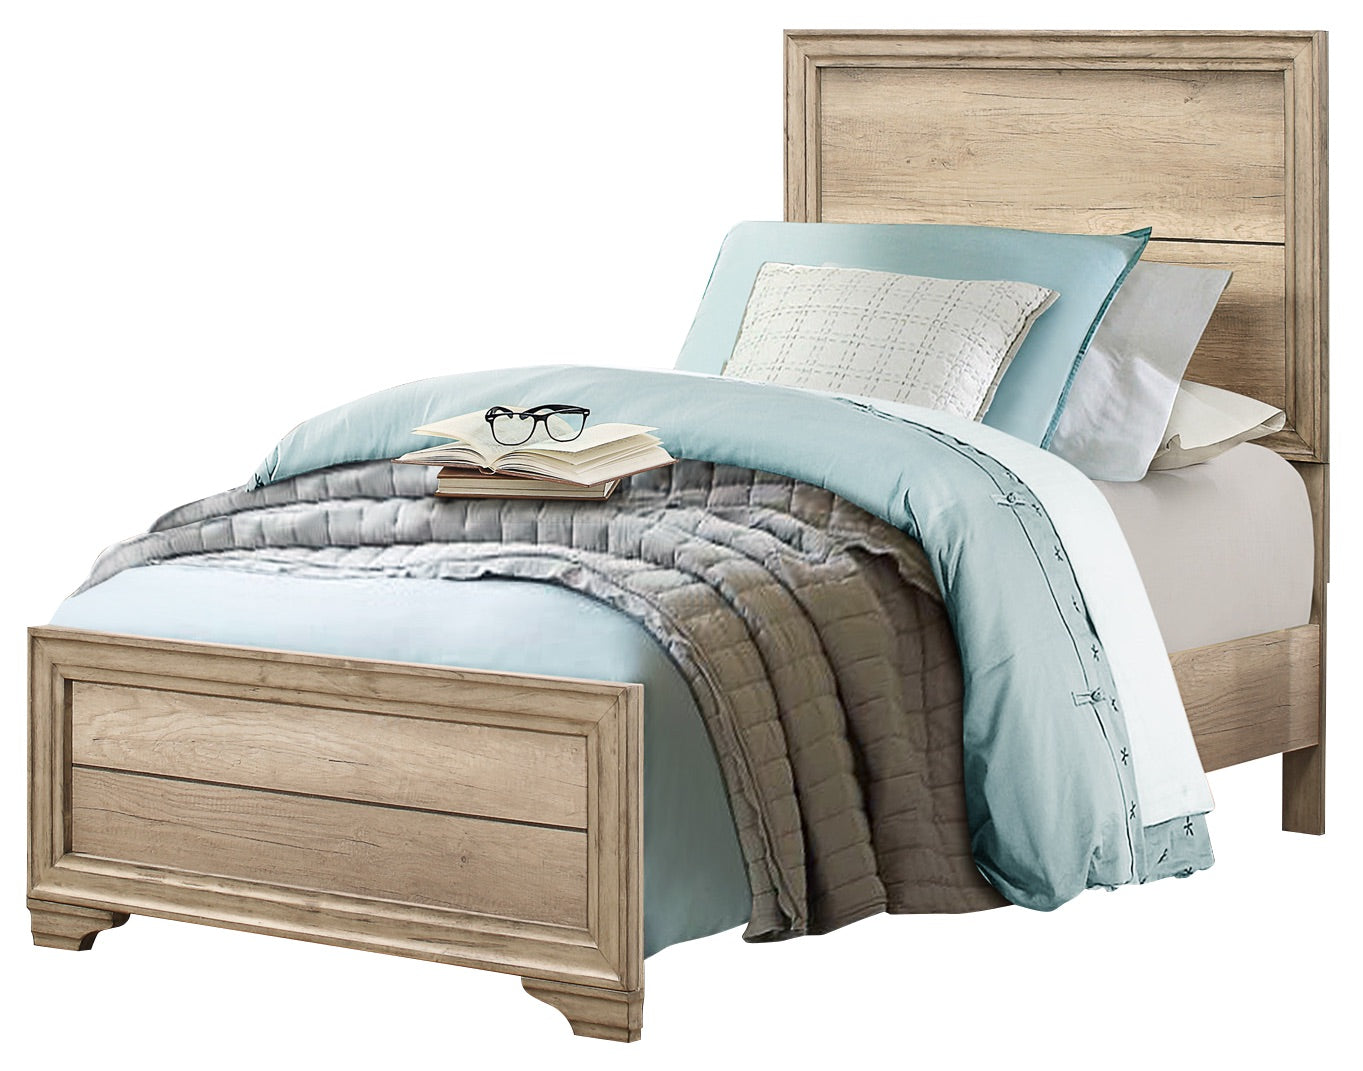 Laudine Rustic Full Bed in Weather Industrial Wood